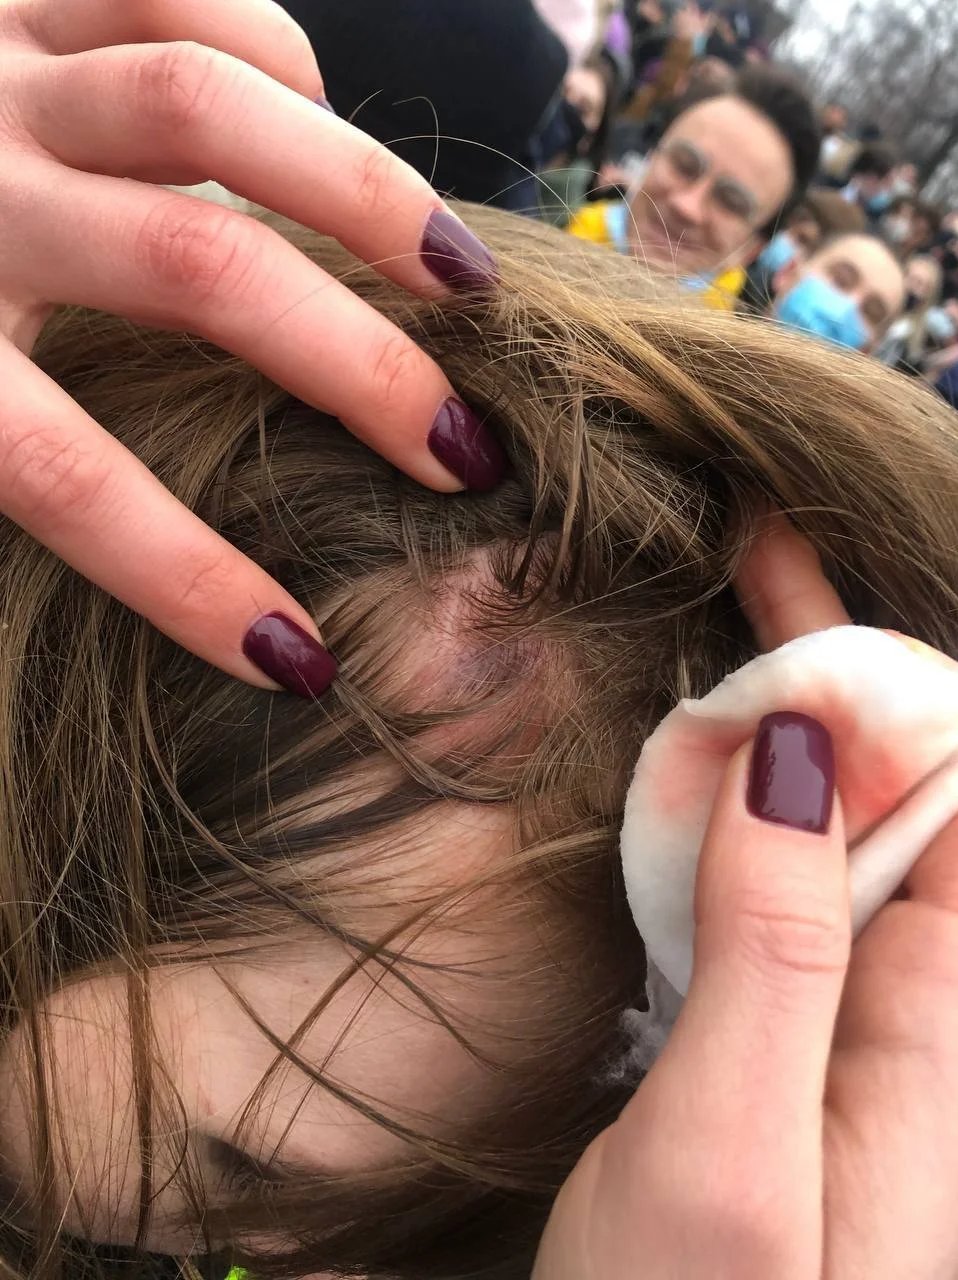 A protester sanitising Elizaveta’s head injury after she was hit with a baton. Photo courtesy of the author